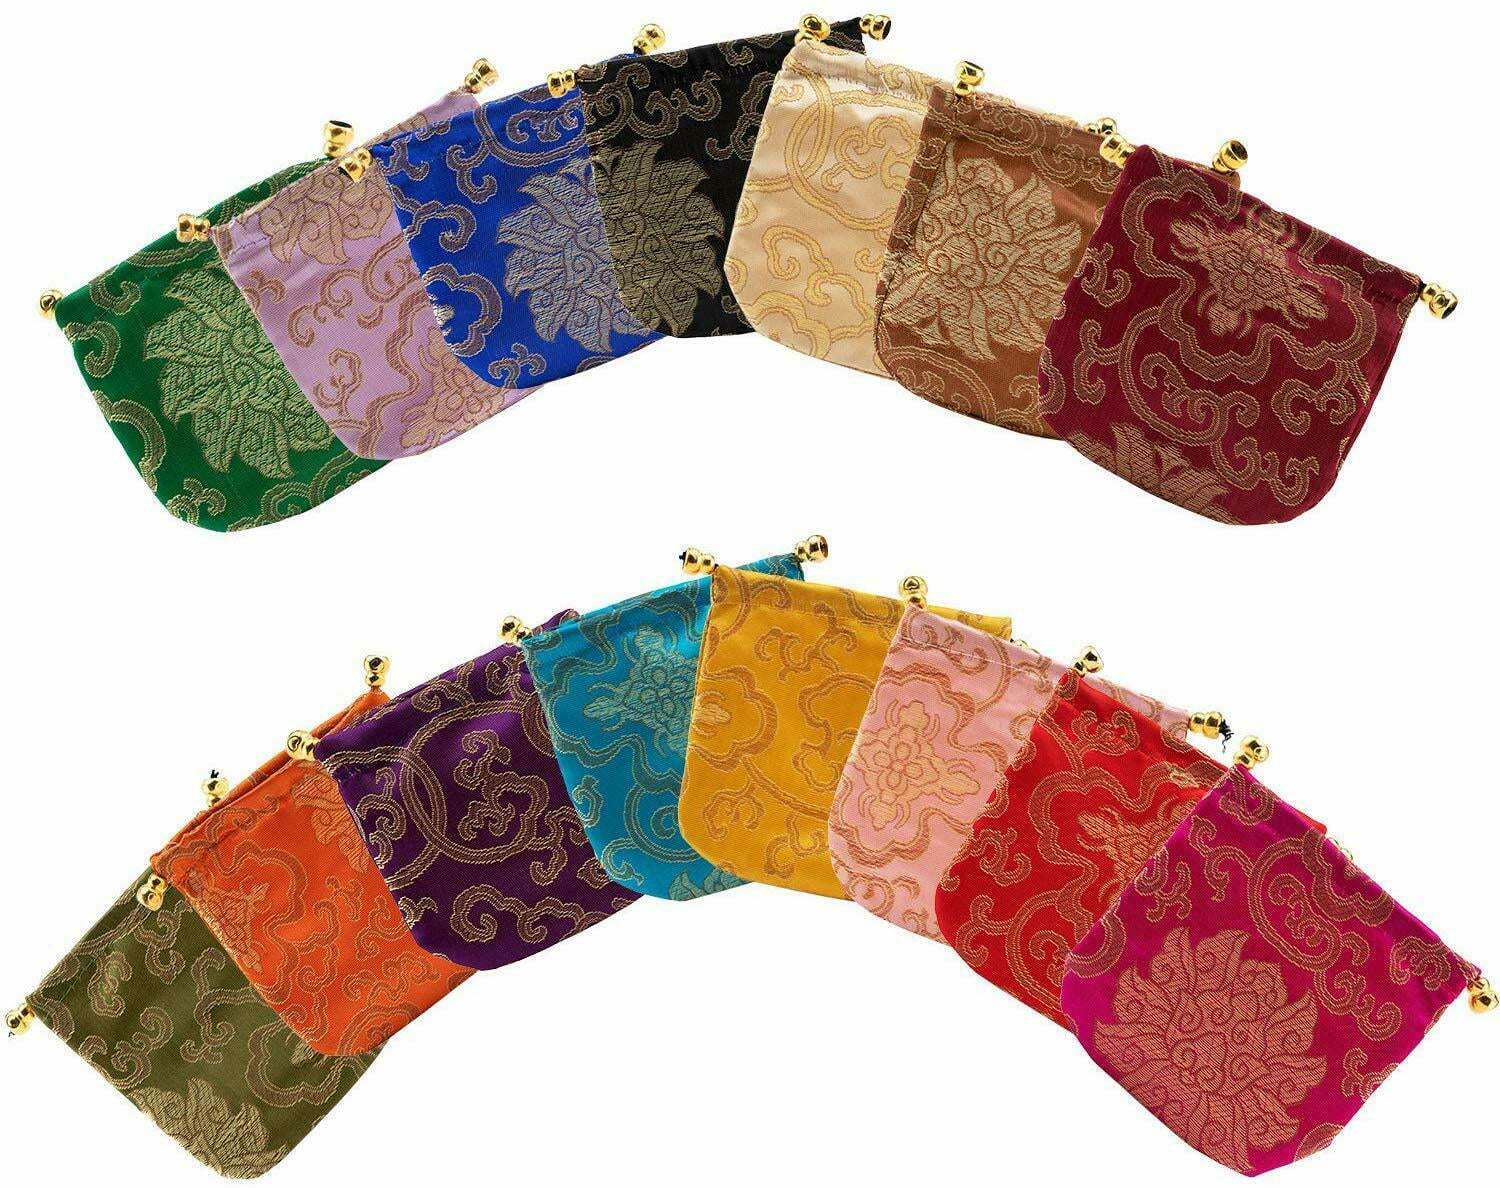 US 16~32 Silk Brocade Jewelry Pouch Bag Drawstring Coin Purse Gift Bag Value Set